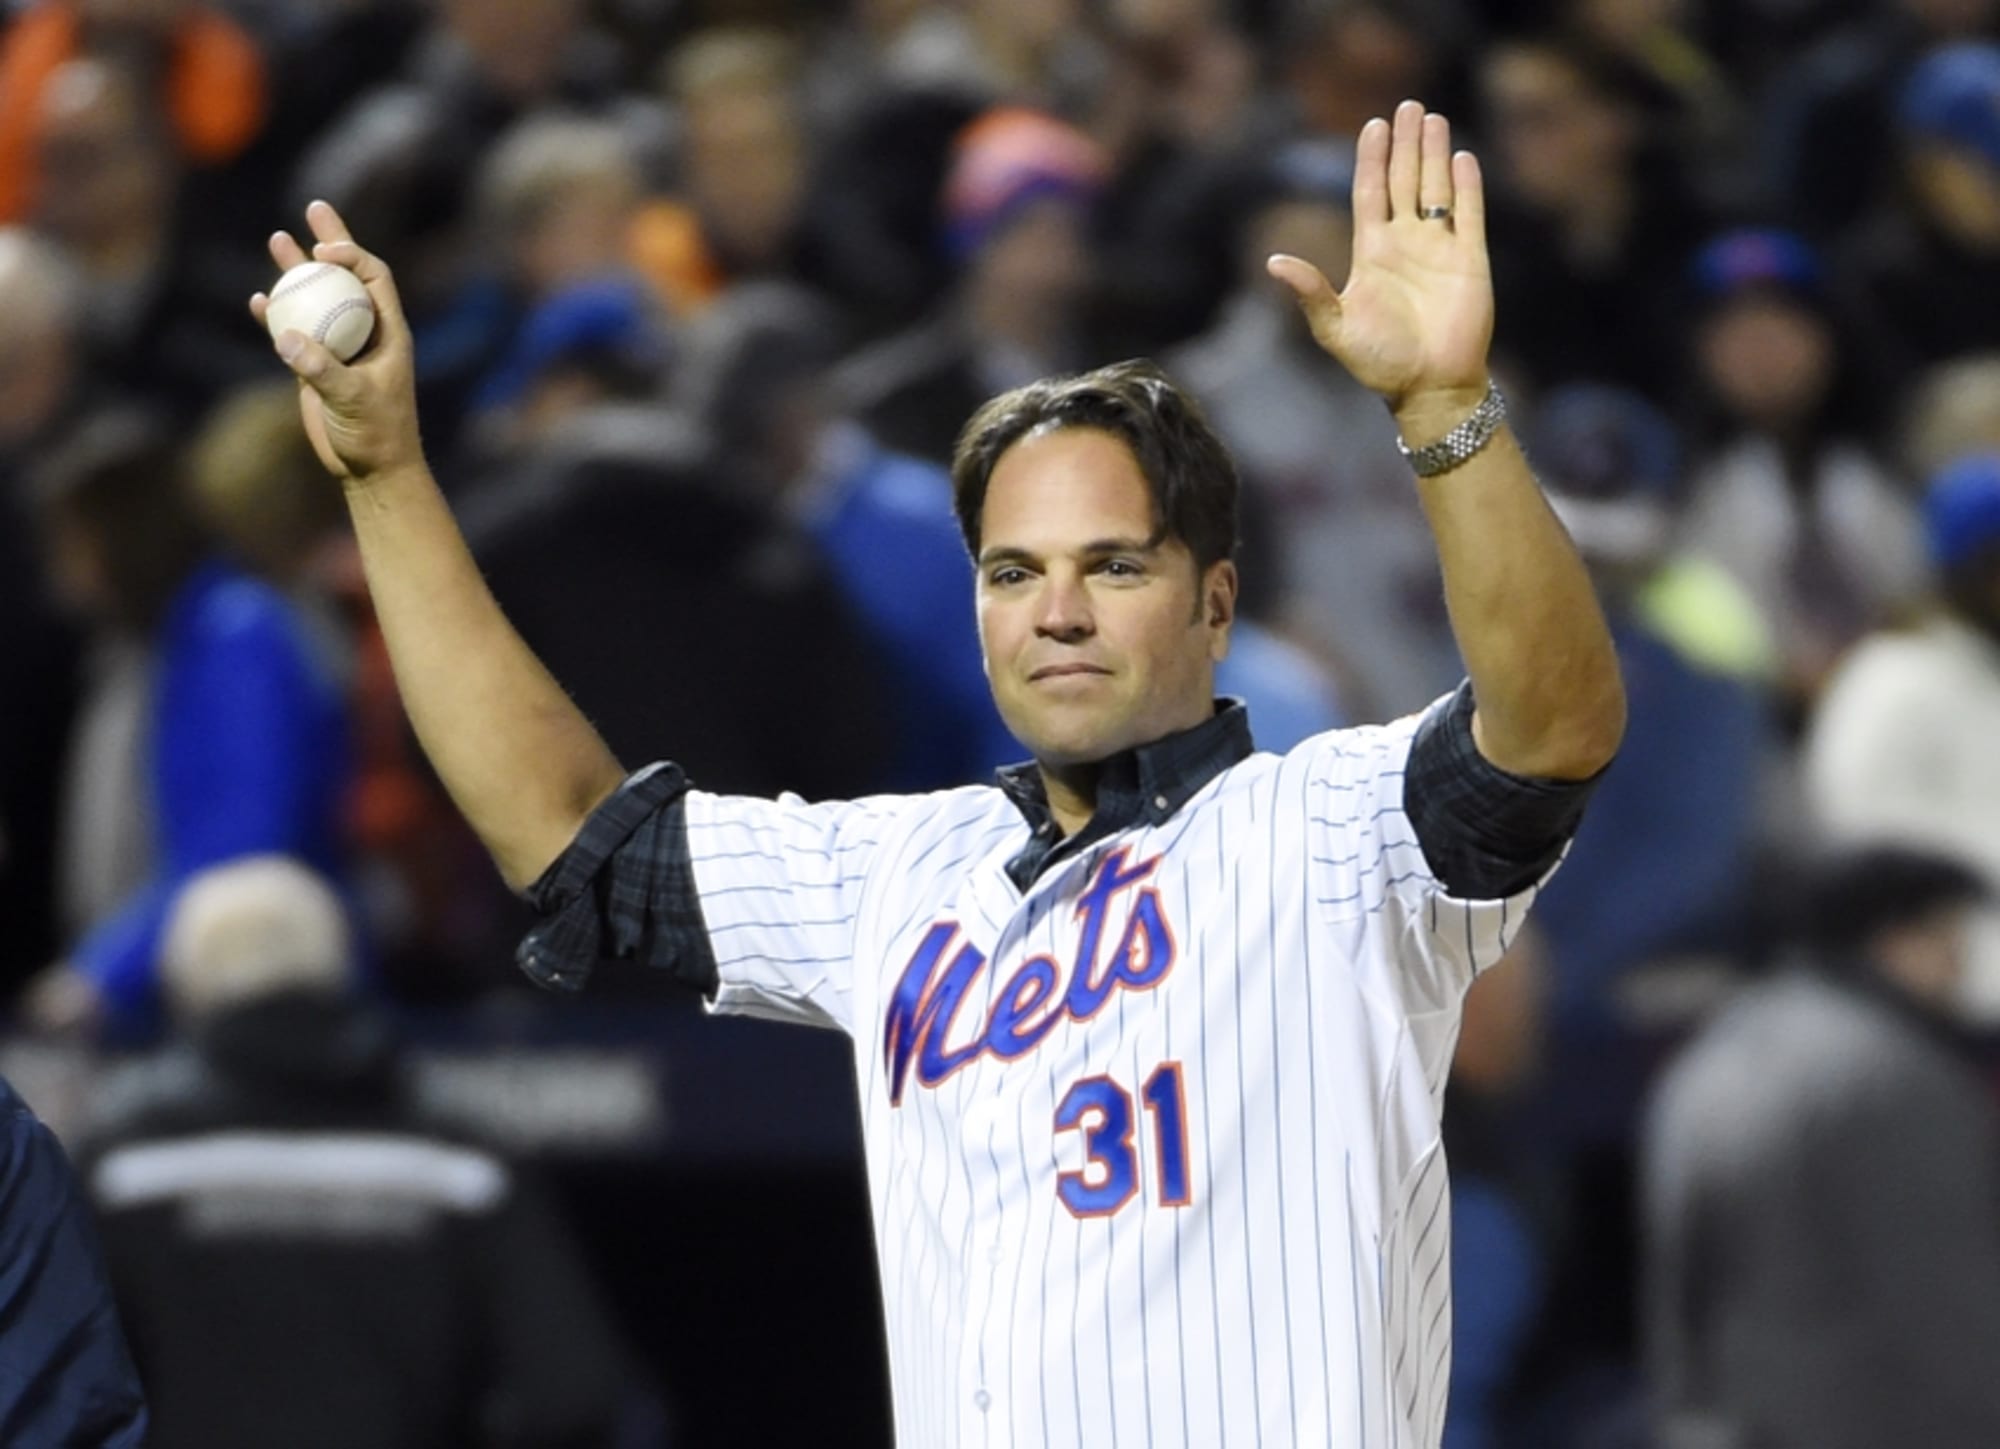 OTD 2016: Mike Piazza Elected to the Hall of Fame - Metsmerized Online